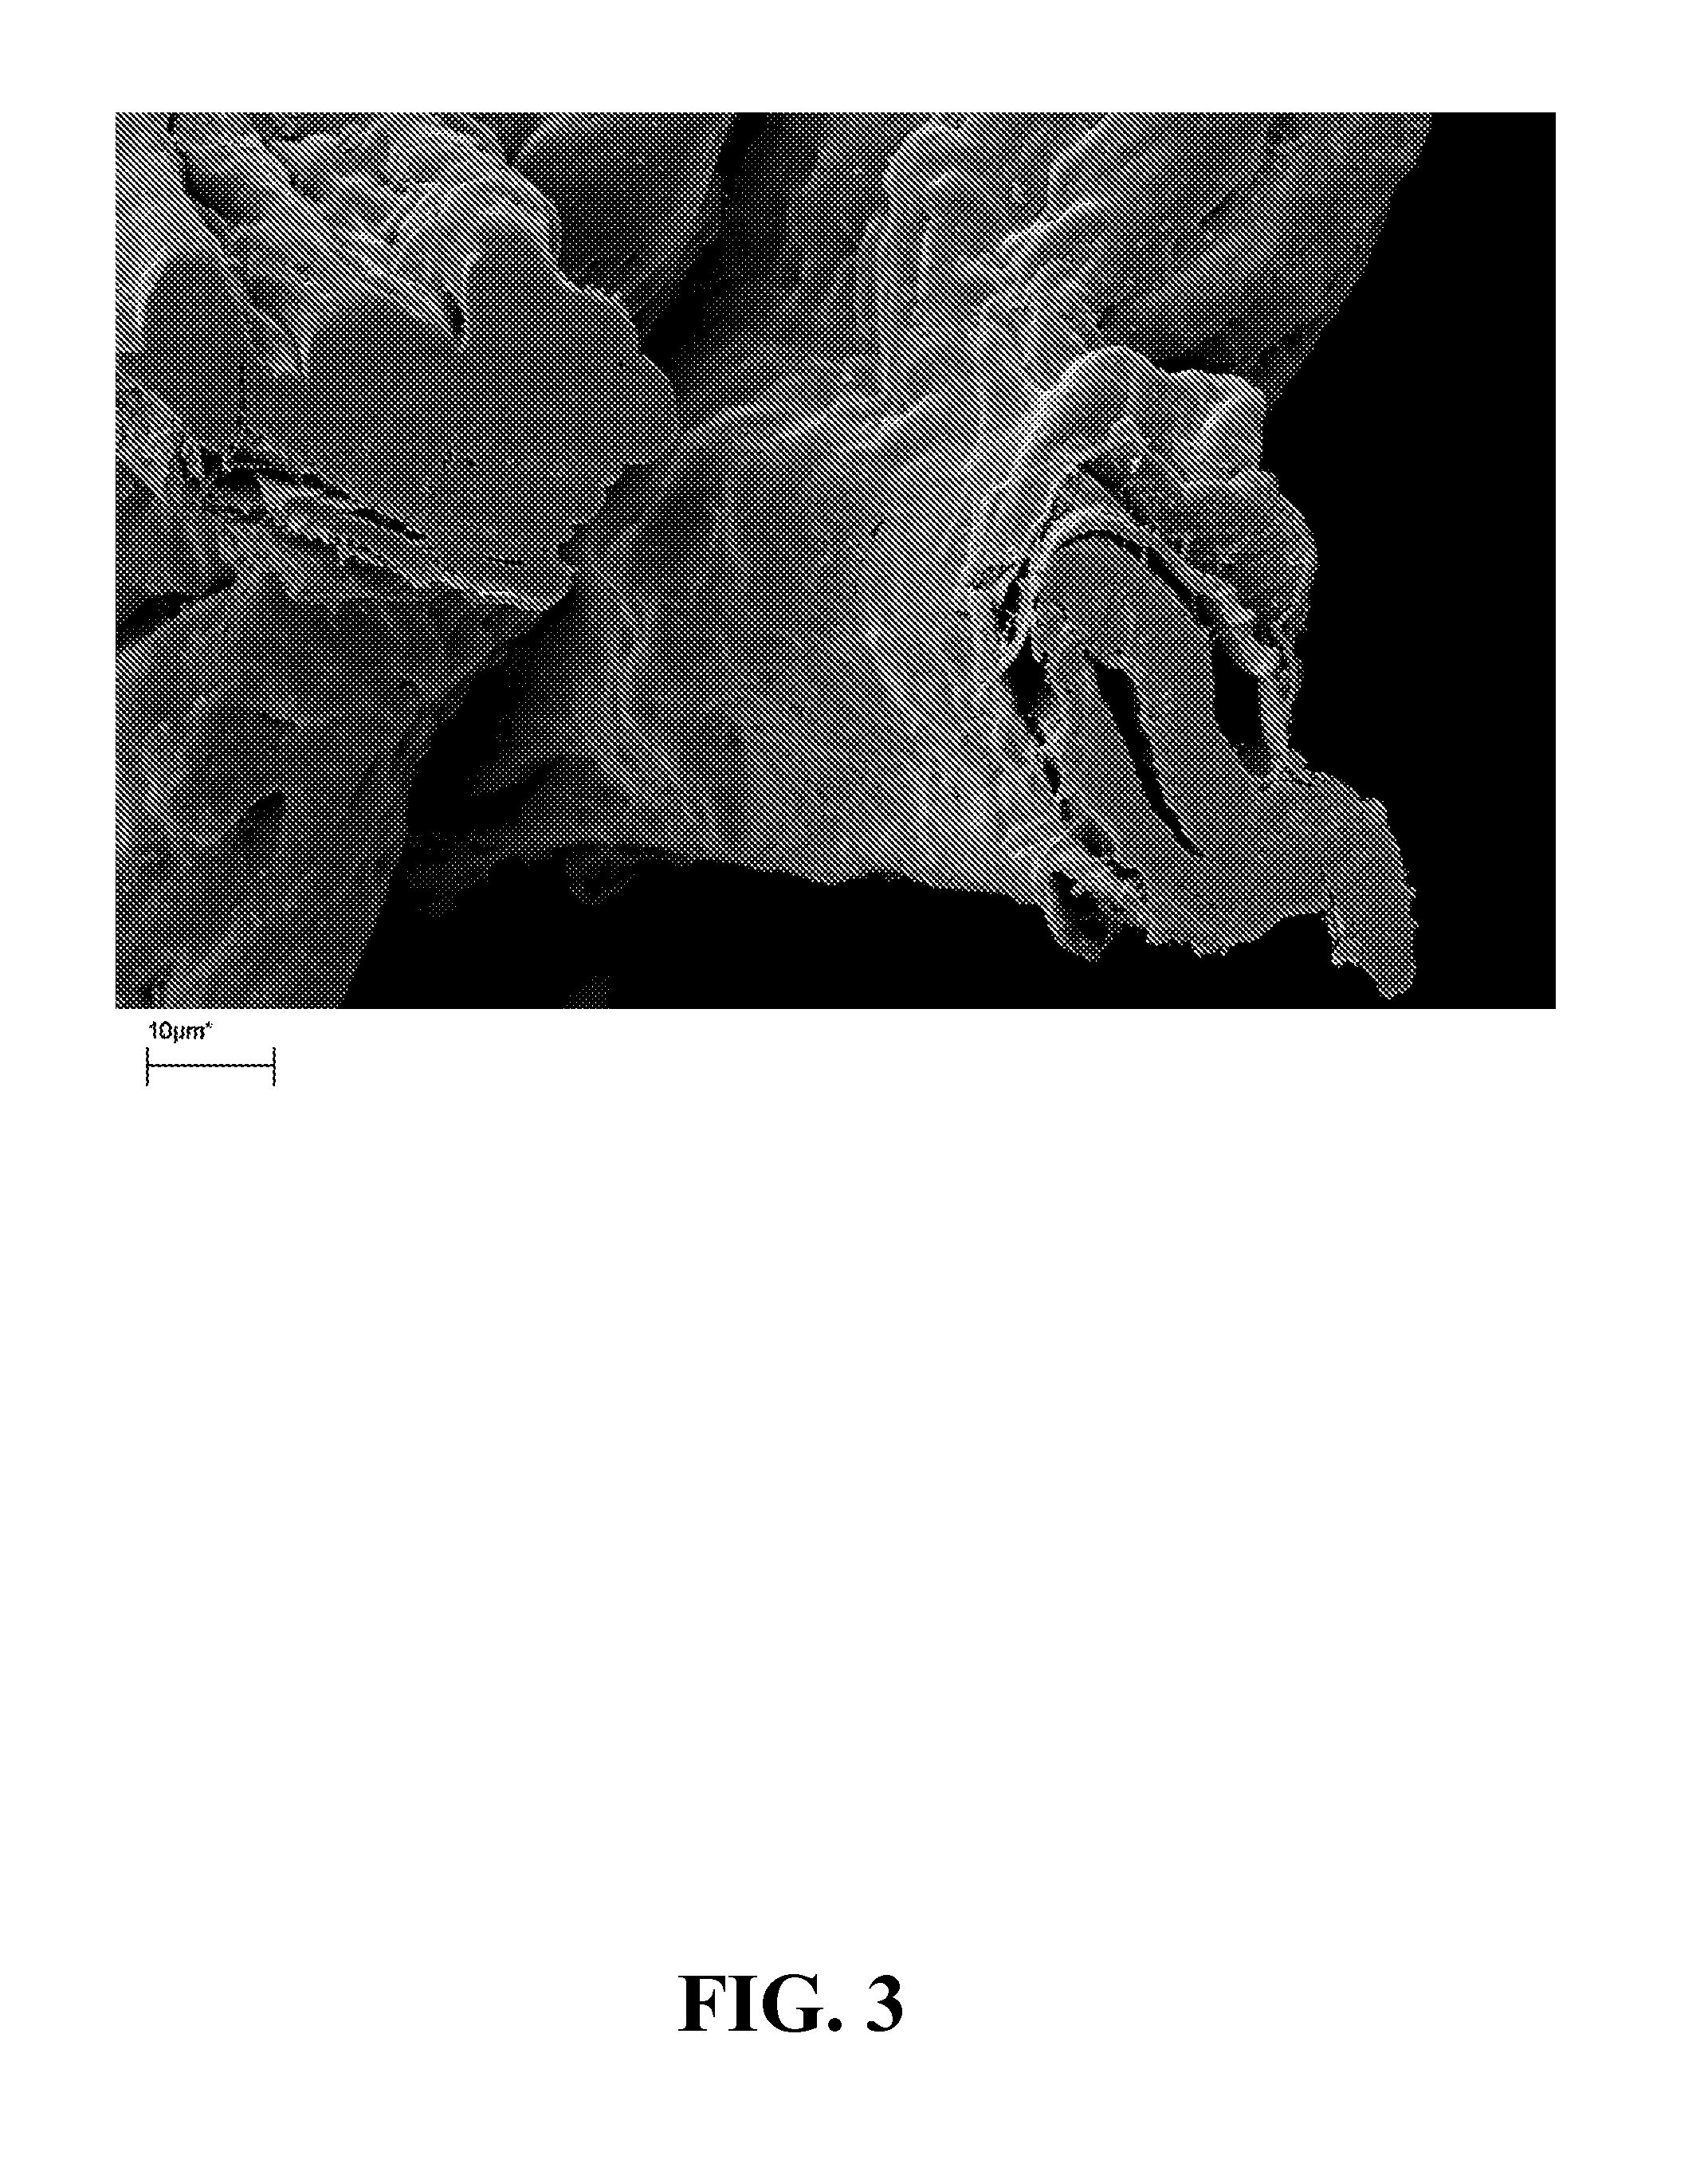 Mixed polymer superabsorbent fibers containing cellulose